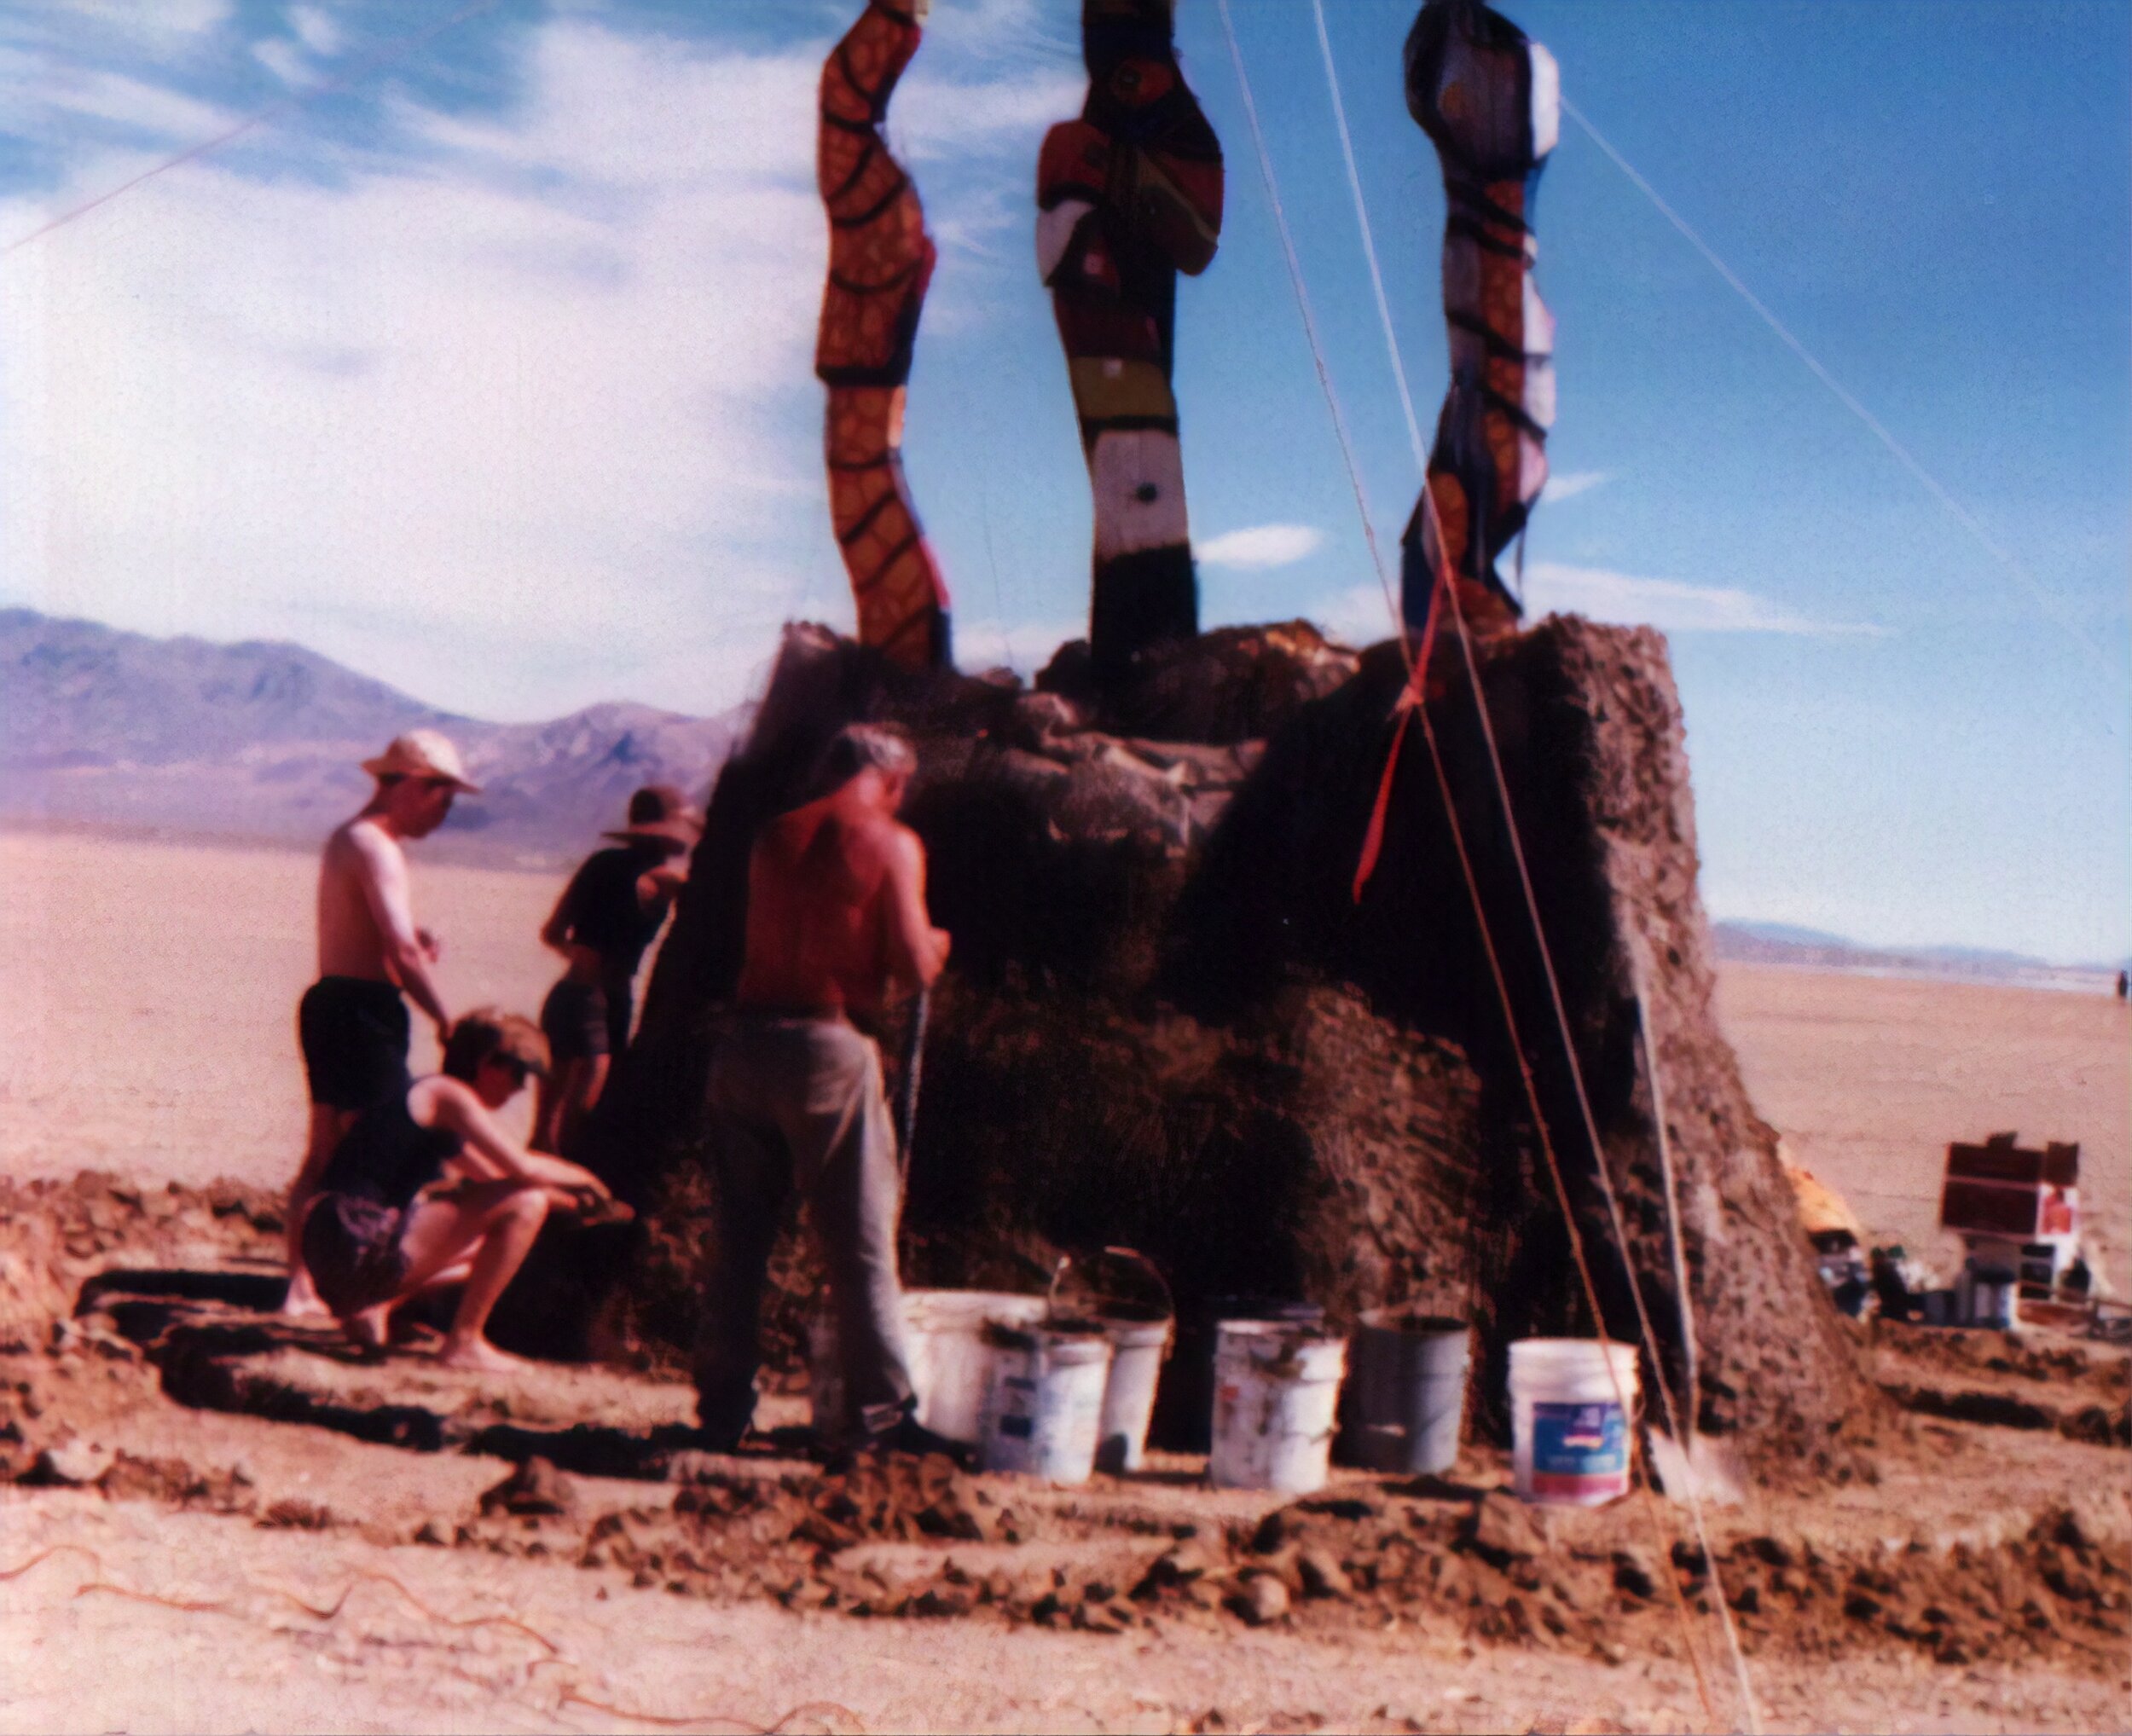  Snakes emerge from the playa. That's Skip the artist in front. I spent several hours helping to coat this with mud. It burned with the Man. 